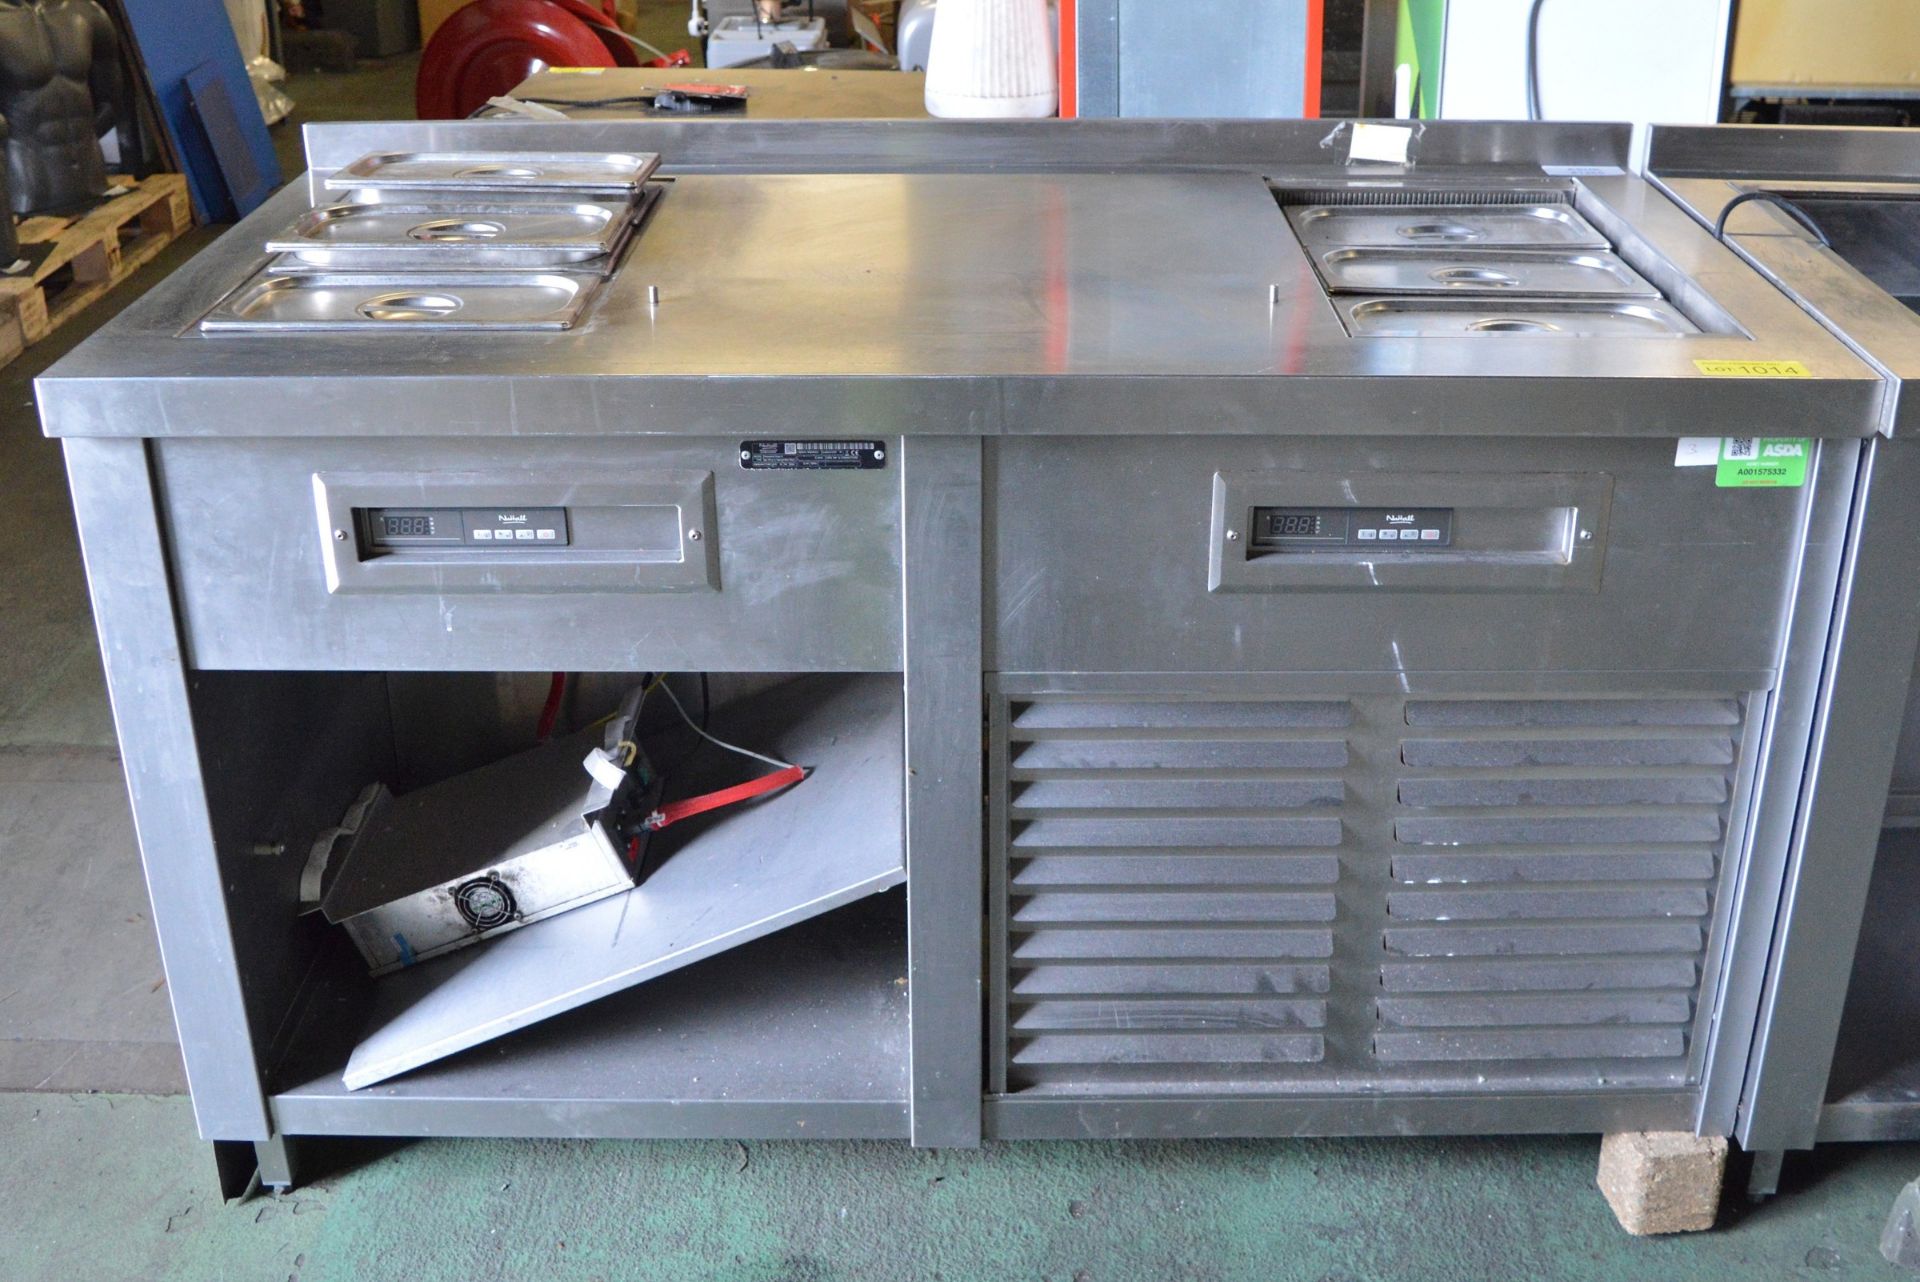 Nuttall Stainless Steel Heated Bain Marie Unit - L1500 x D750 x H960mm